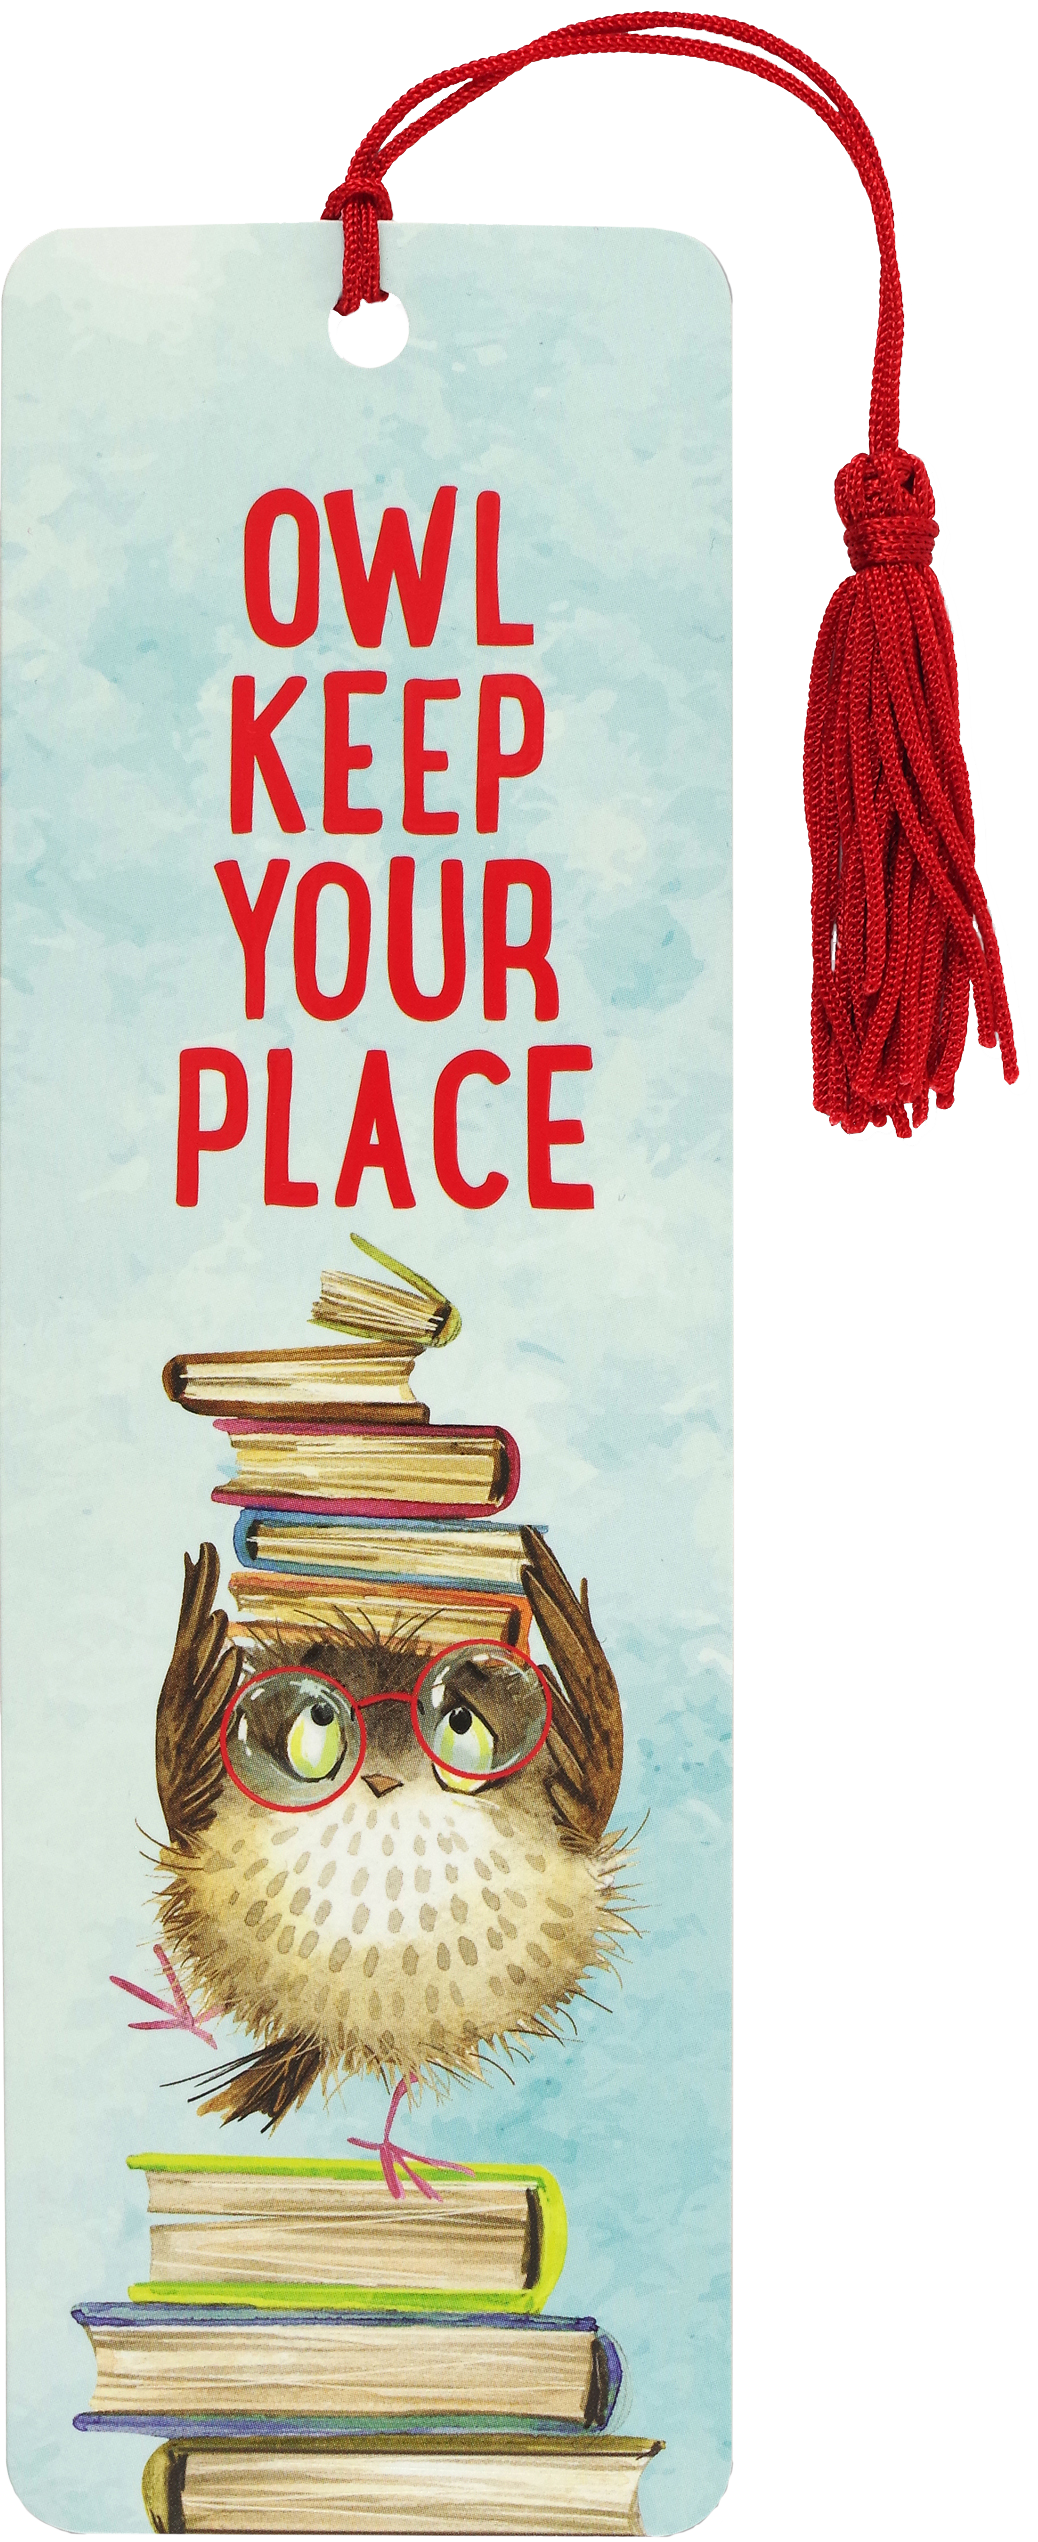 Peter Pauper Press - Owl Keep Your Place Youth Bookmark